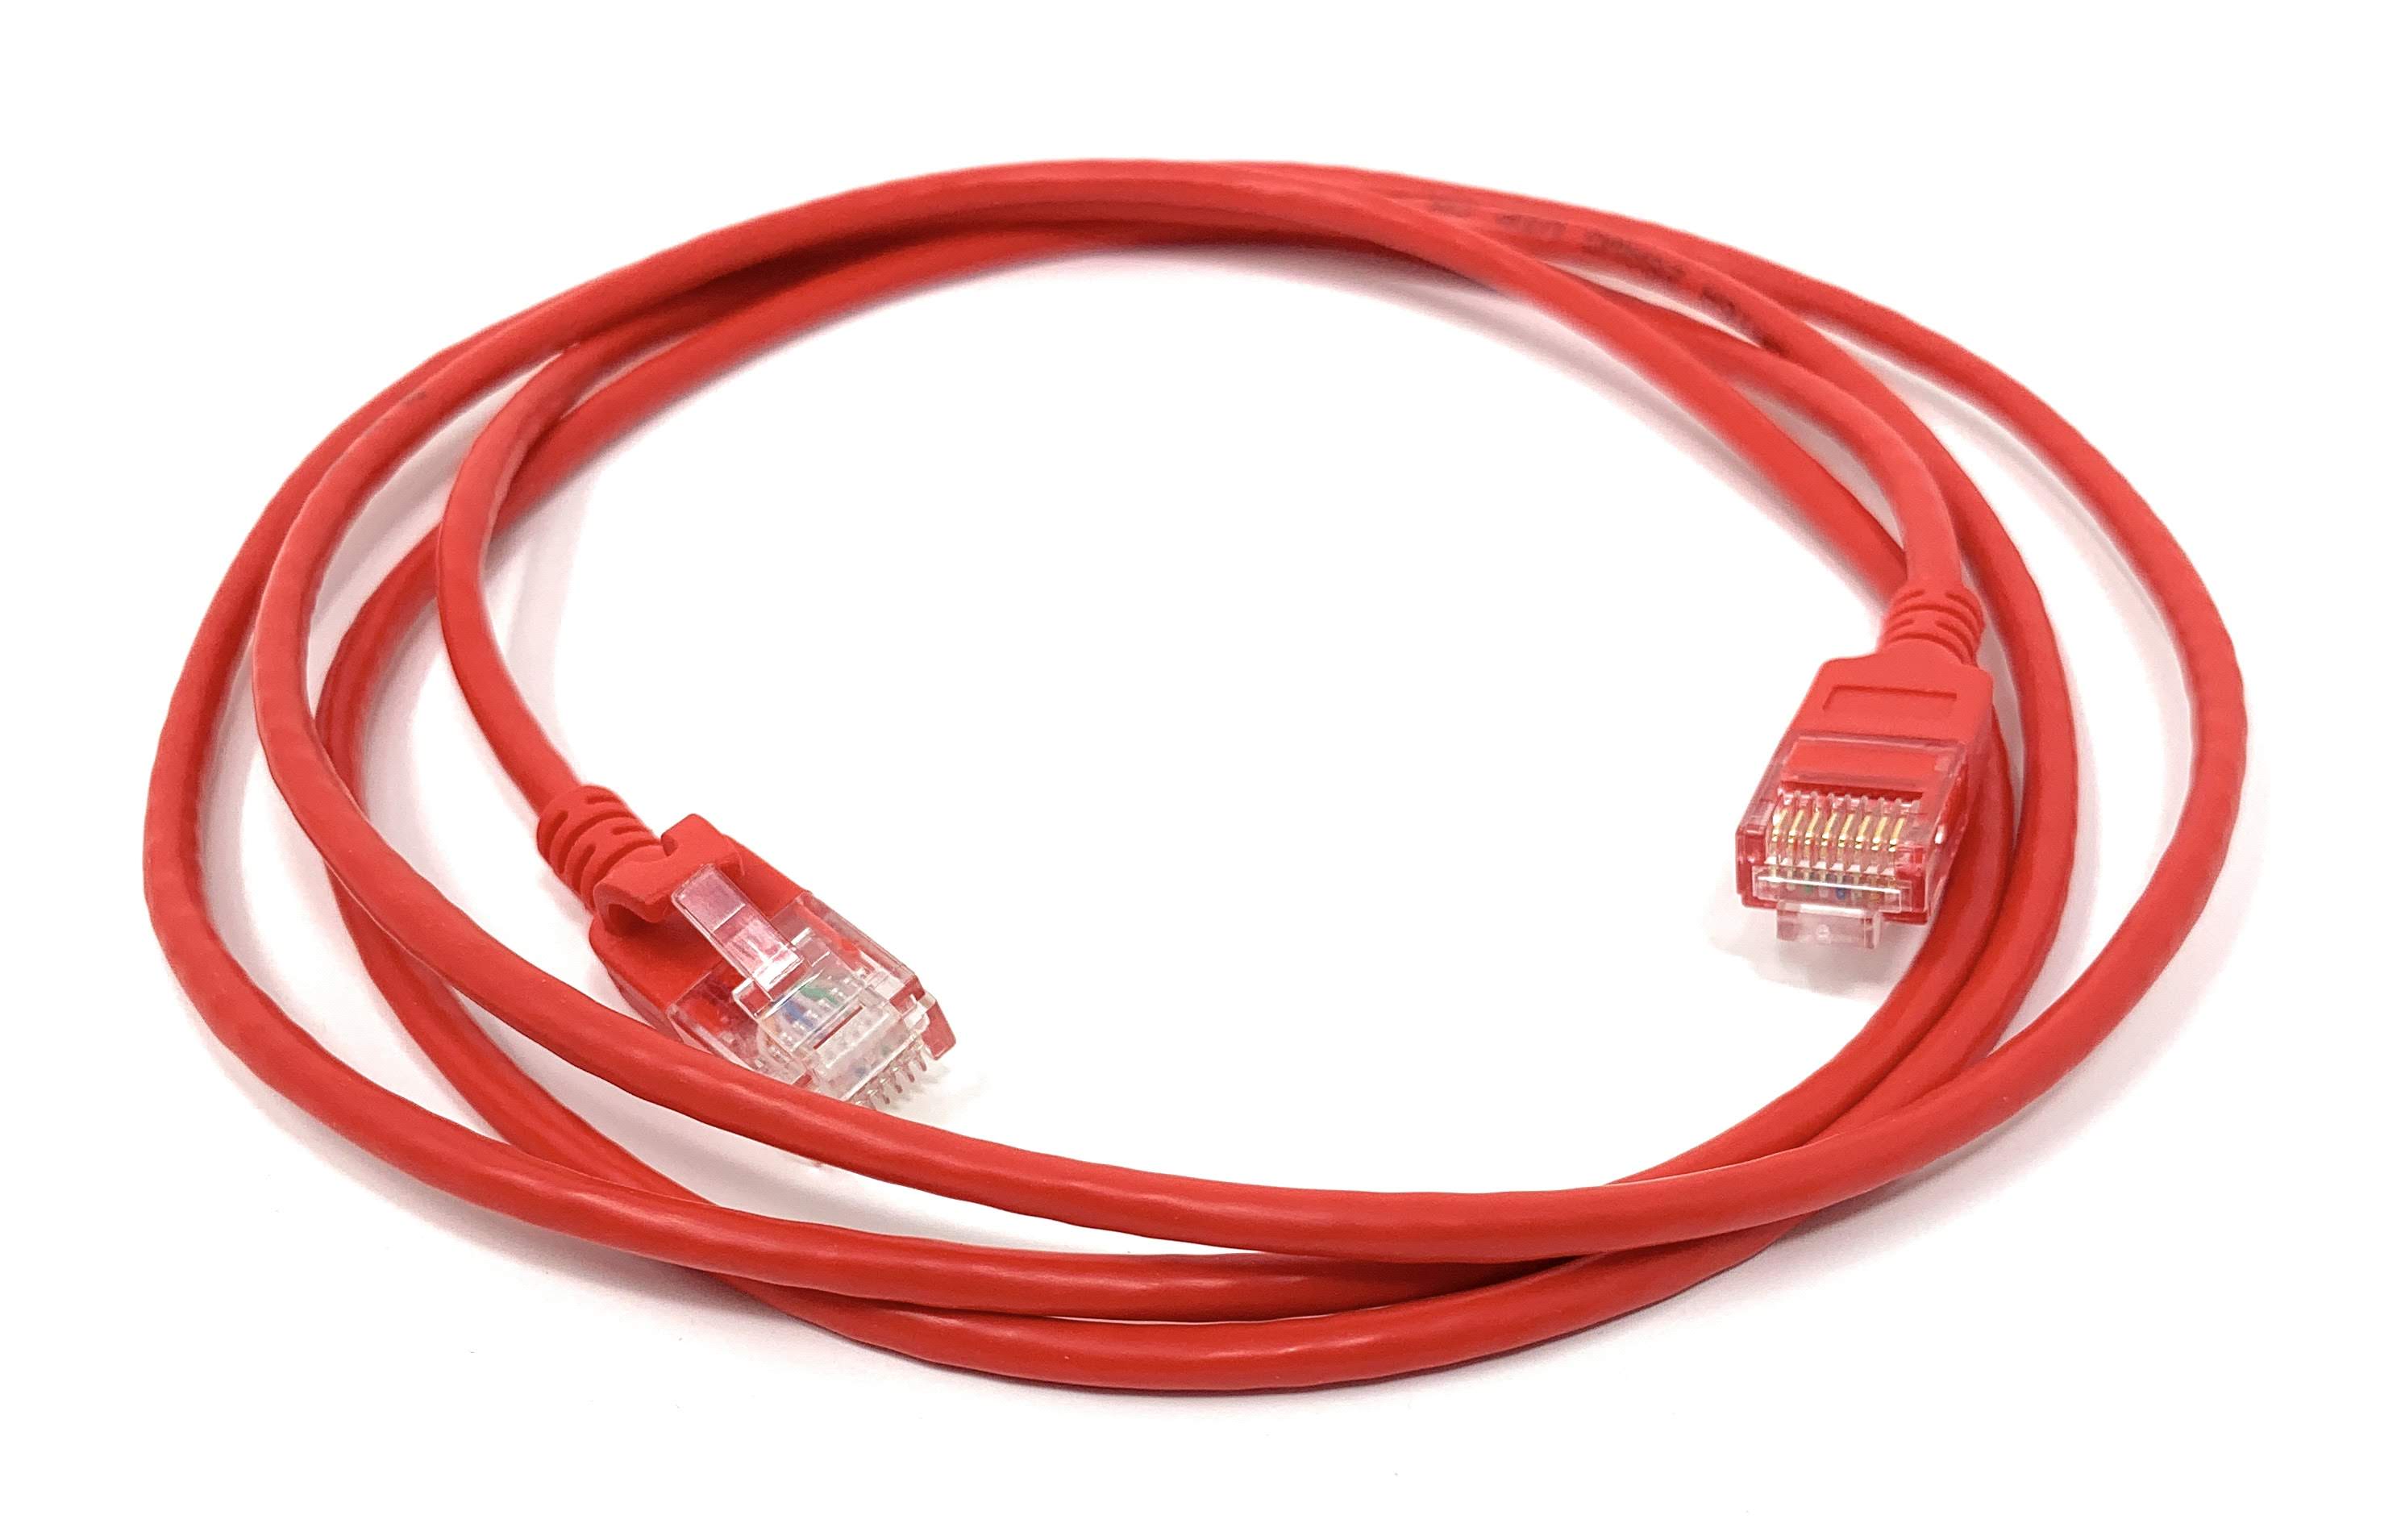 1Ft Cat6A UTP Slim Ethernet Network Booted Cable 28AWG Red